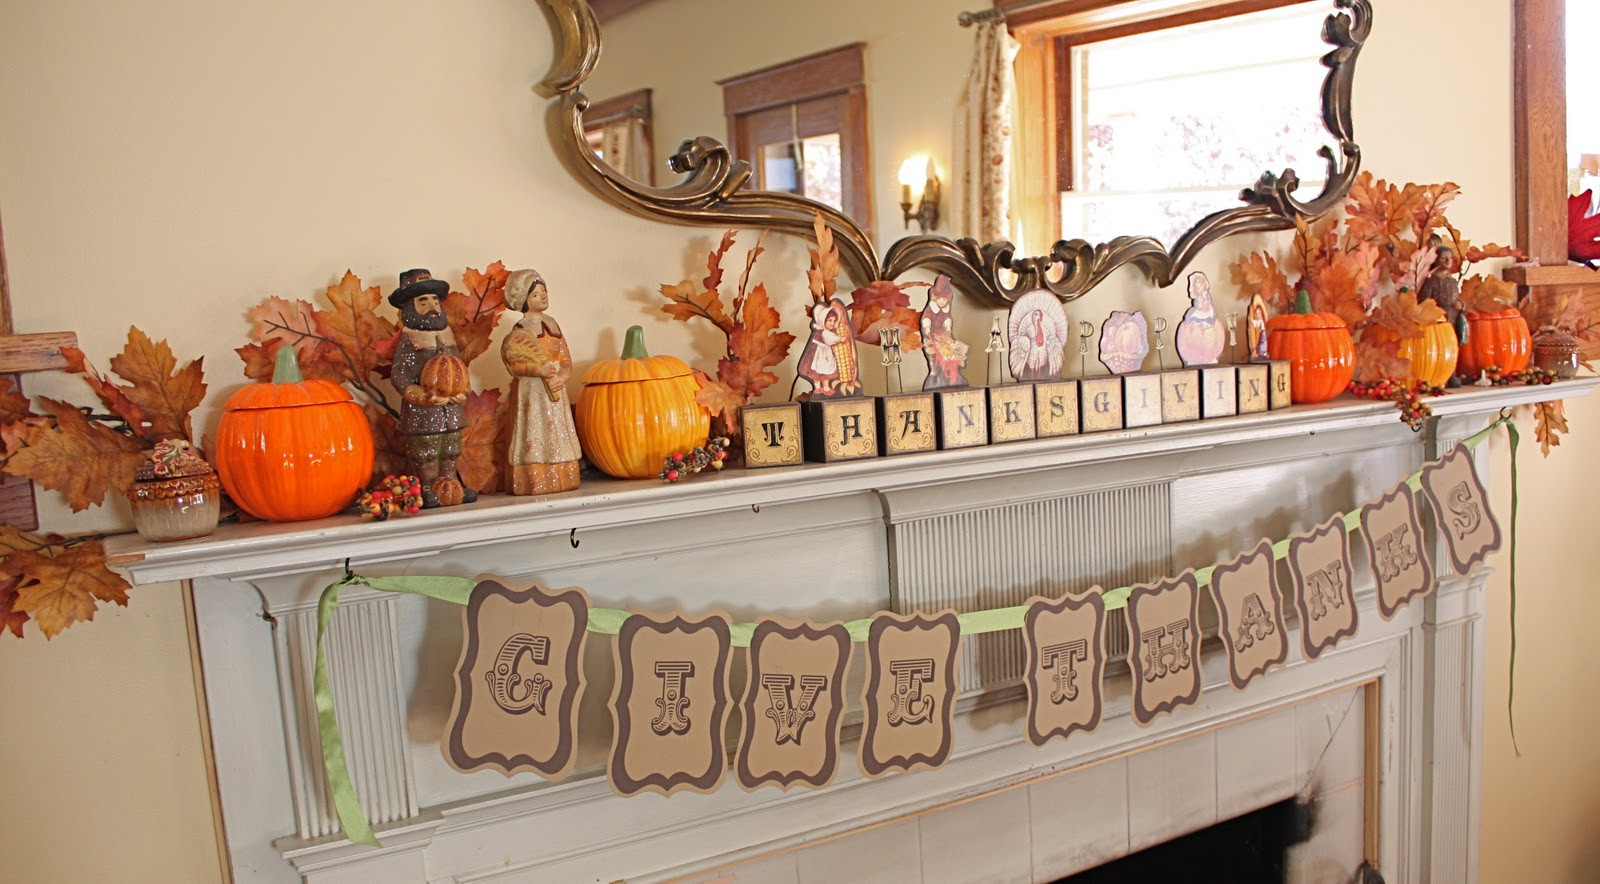 Thanksgiving Home Decor
 At Second Street Thanksgiving mantel and other decor